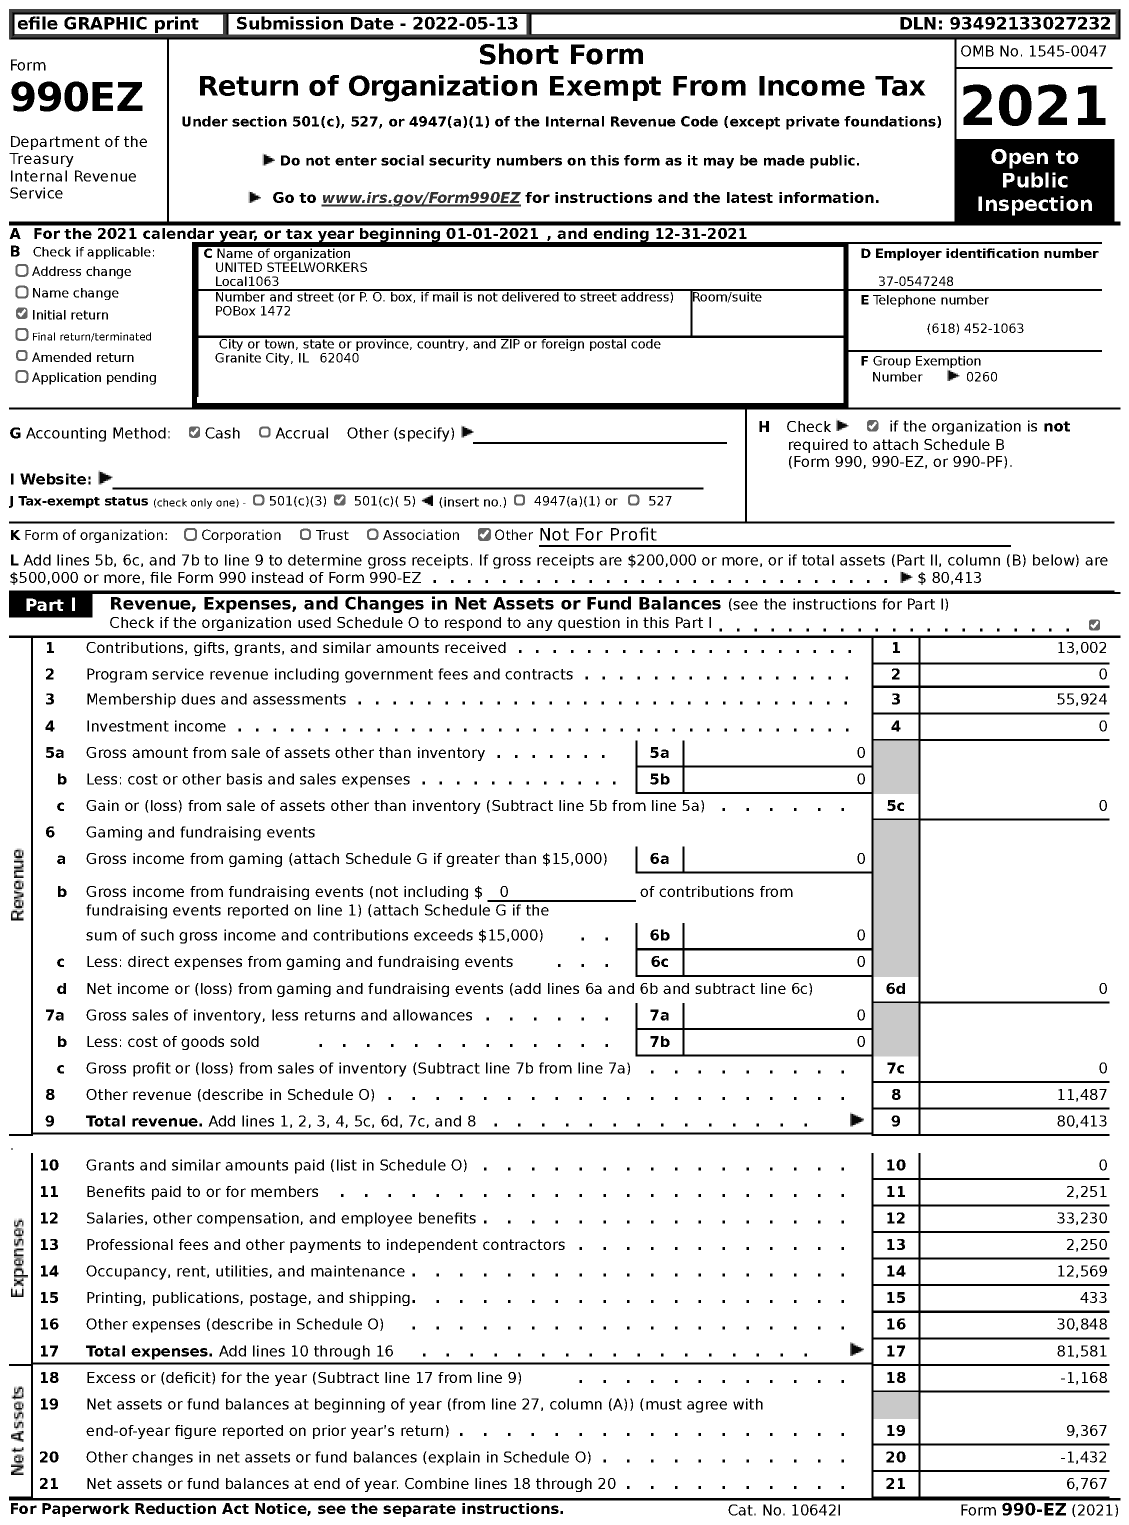 Image of first page of 2021 Form 990EZ for UNITED STEELWORKERS - 01063 Local